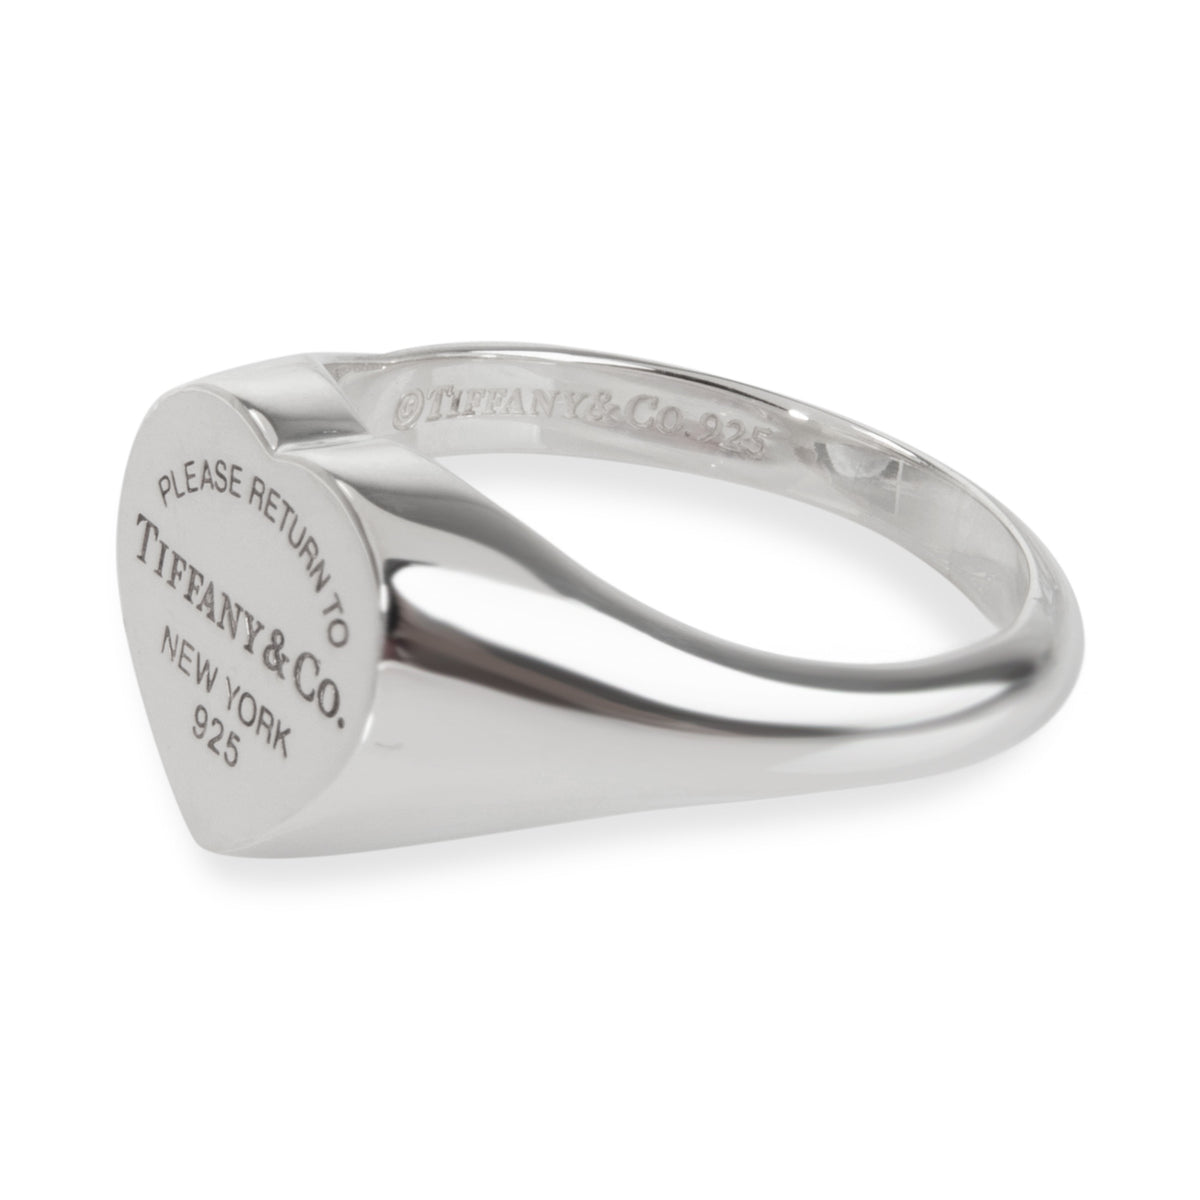 Tiffany & Co. Return to Tiffany Heart Signet Ring in  Sterling Silver